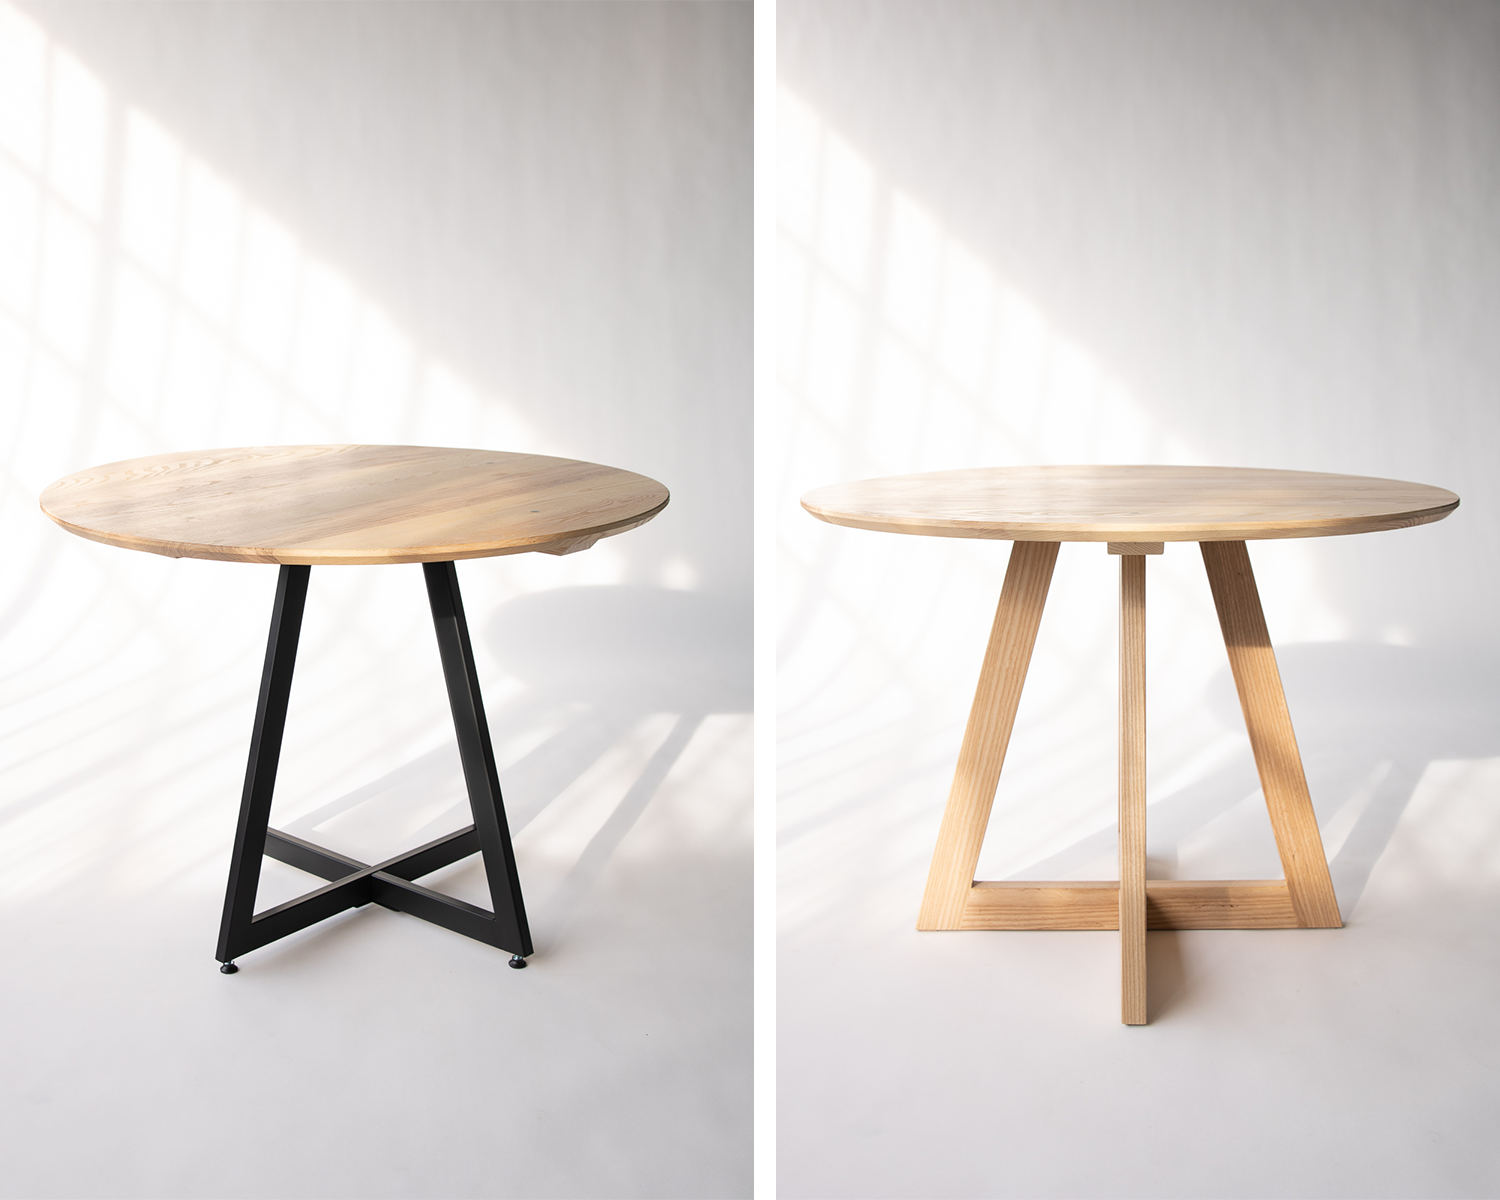 The Seneca Table - Small Round Dining Table made in Columbus, Ohio